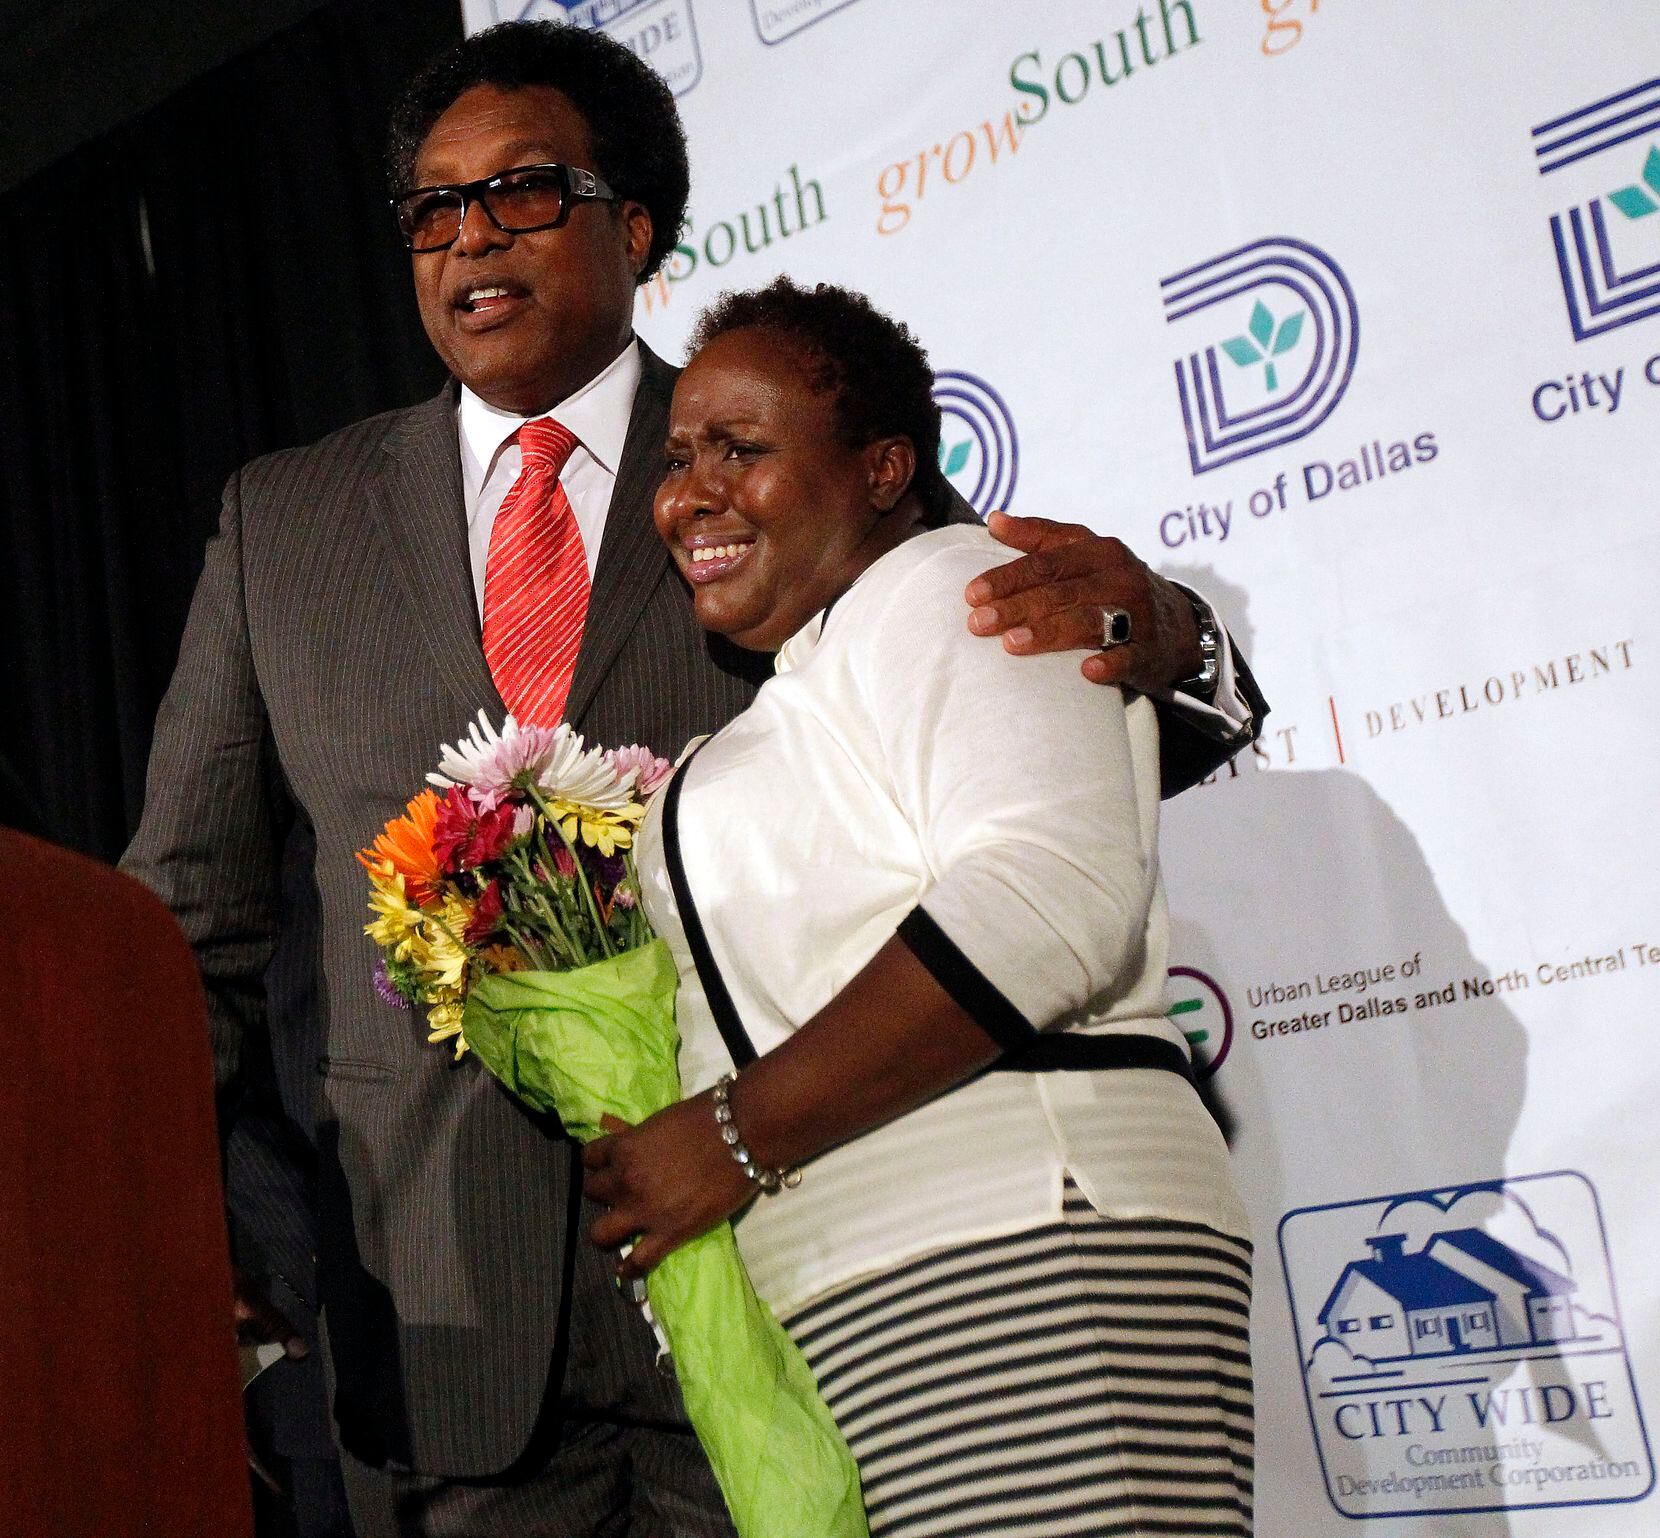 Dwaine Caraway, left, and Carolyn Davis in 2014. The two former Dallas City Council members have been accused of taking numerous bribes from affordable housing developers, including a new case that was filed this week. Davis died in a car crash last year and Caraway is in prison. 